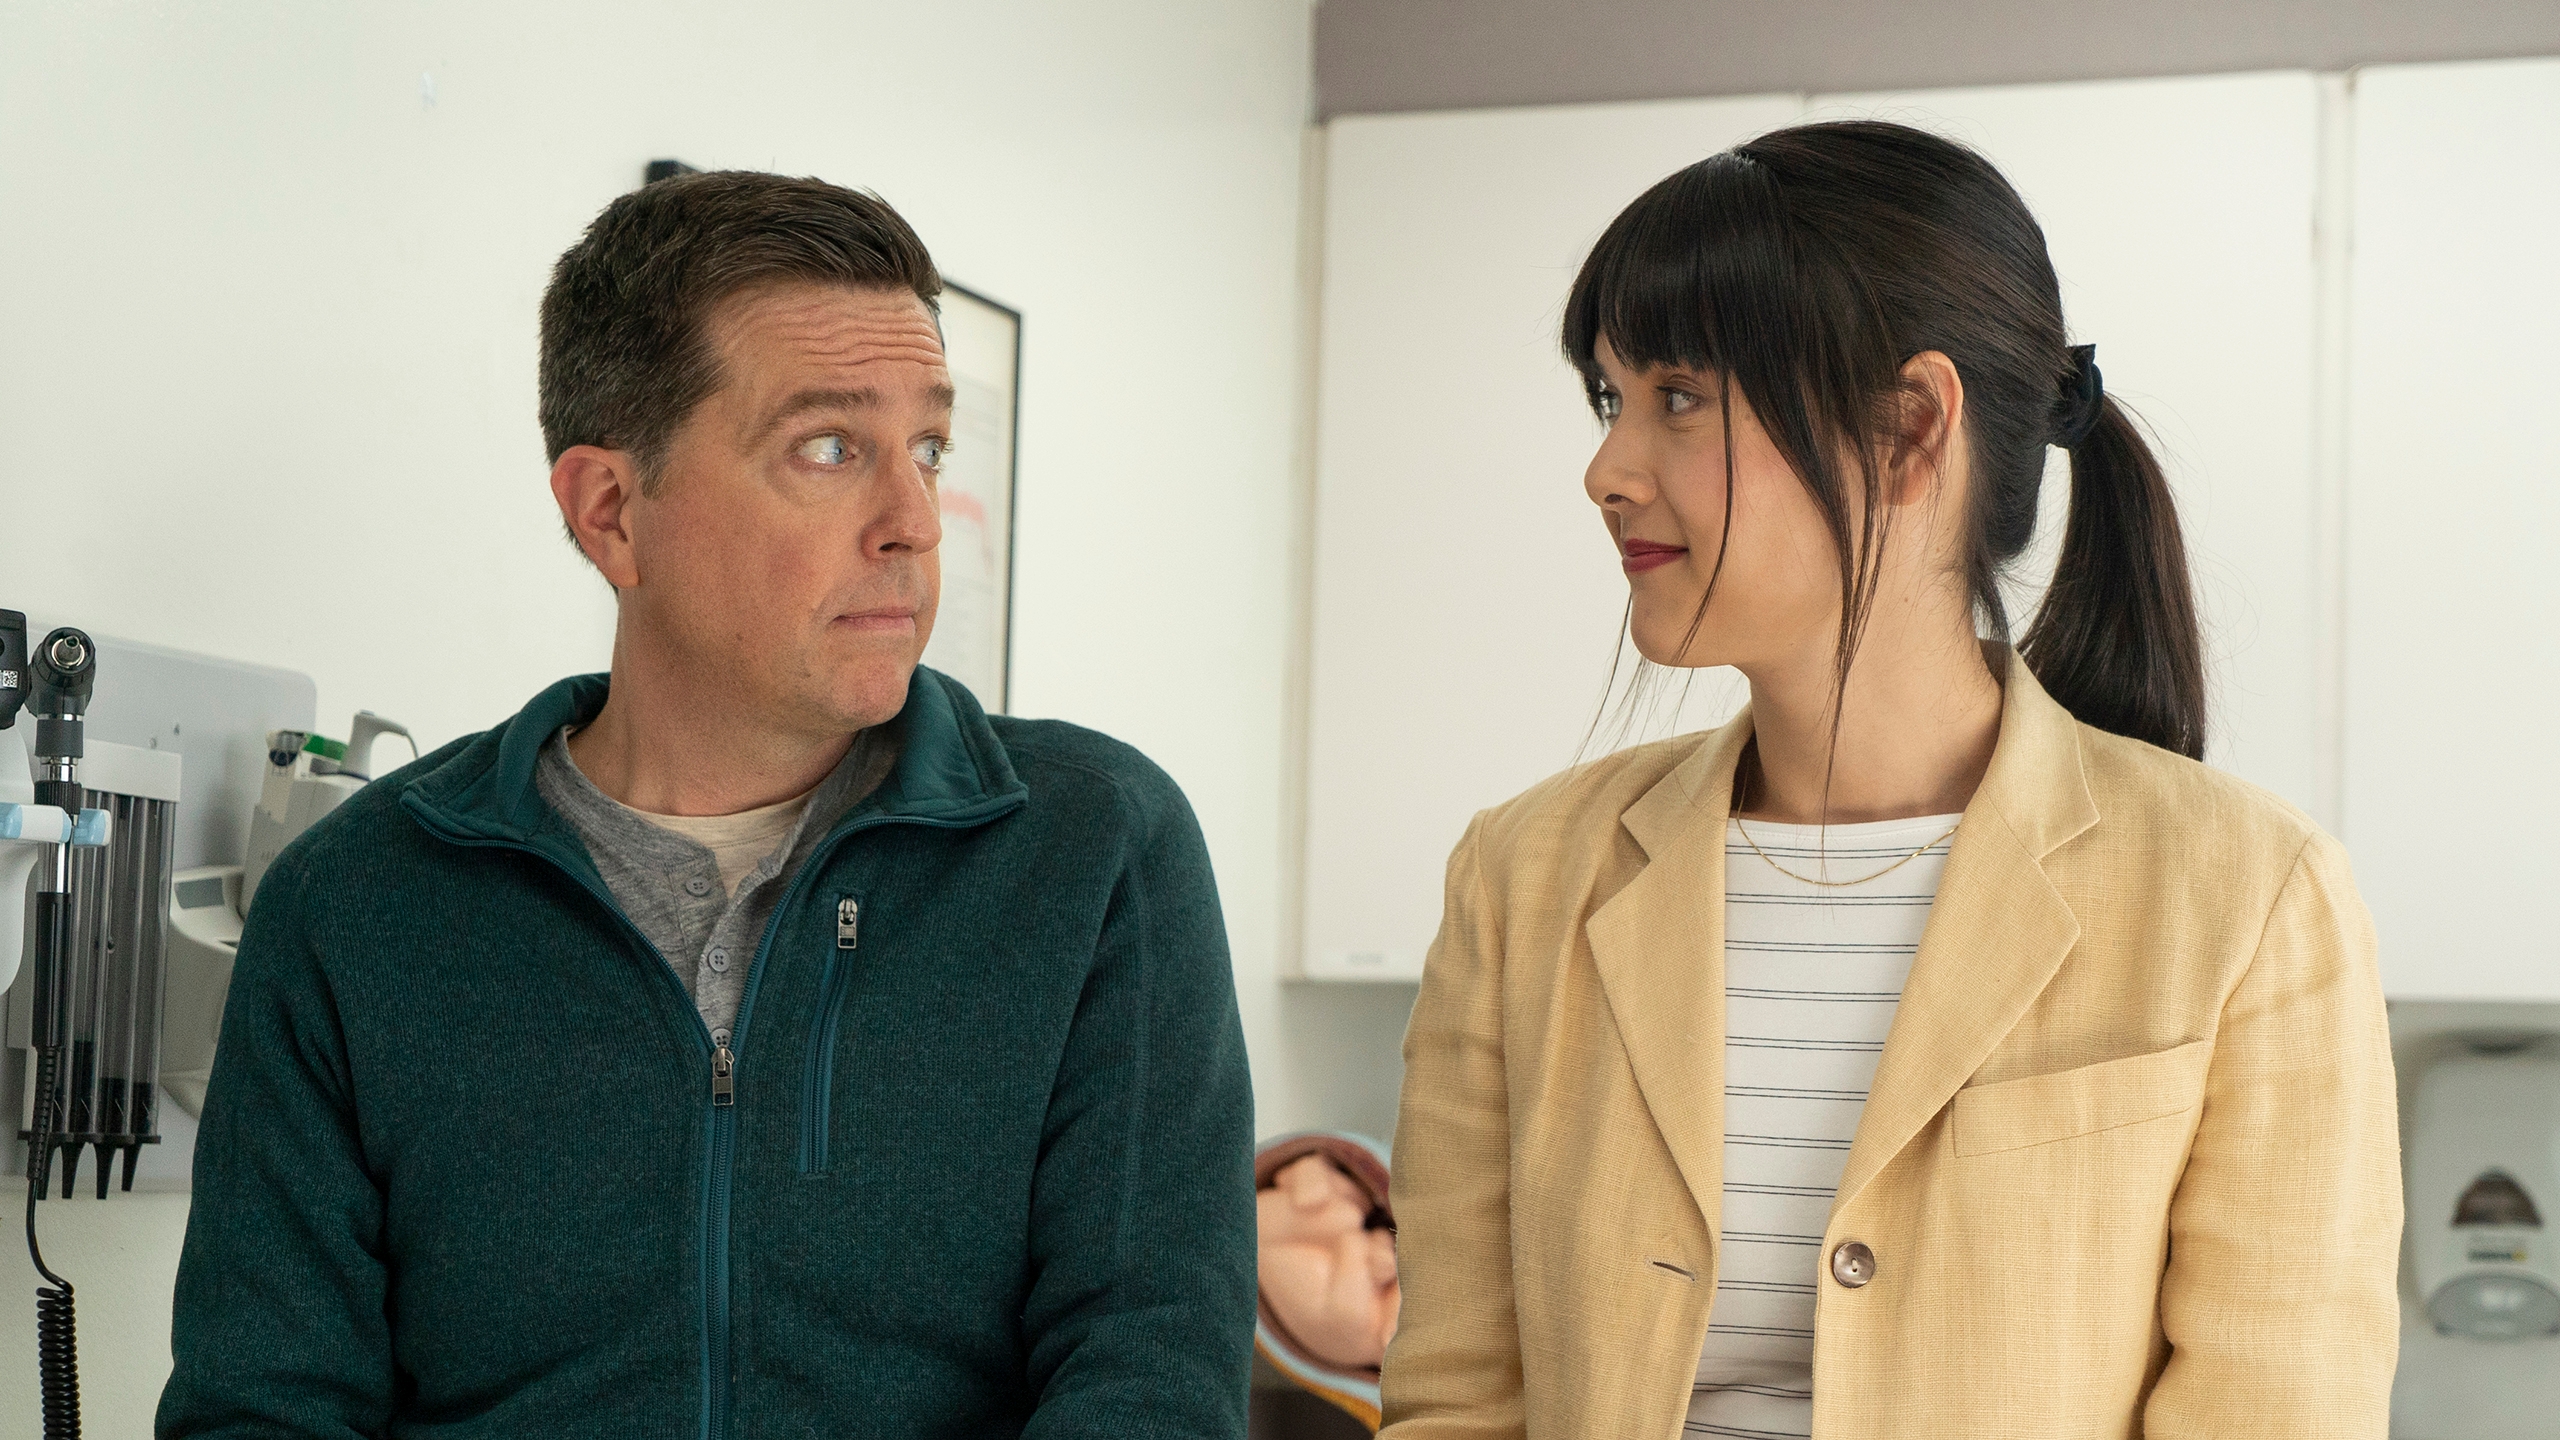 Together Together arranges a touching platonic love story for Ed Helms and Patti Harrison